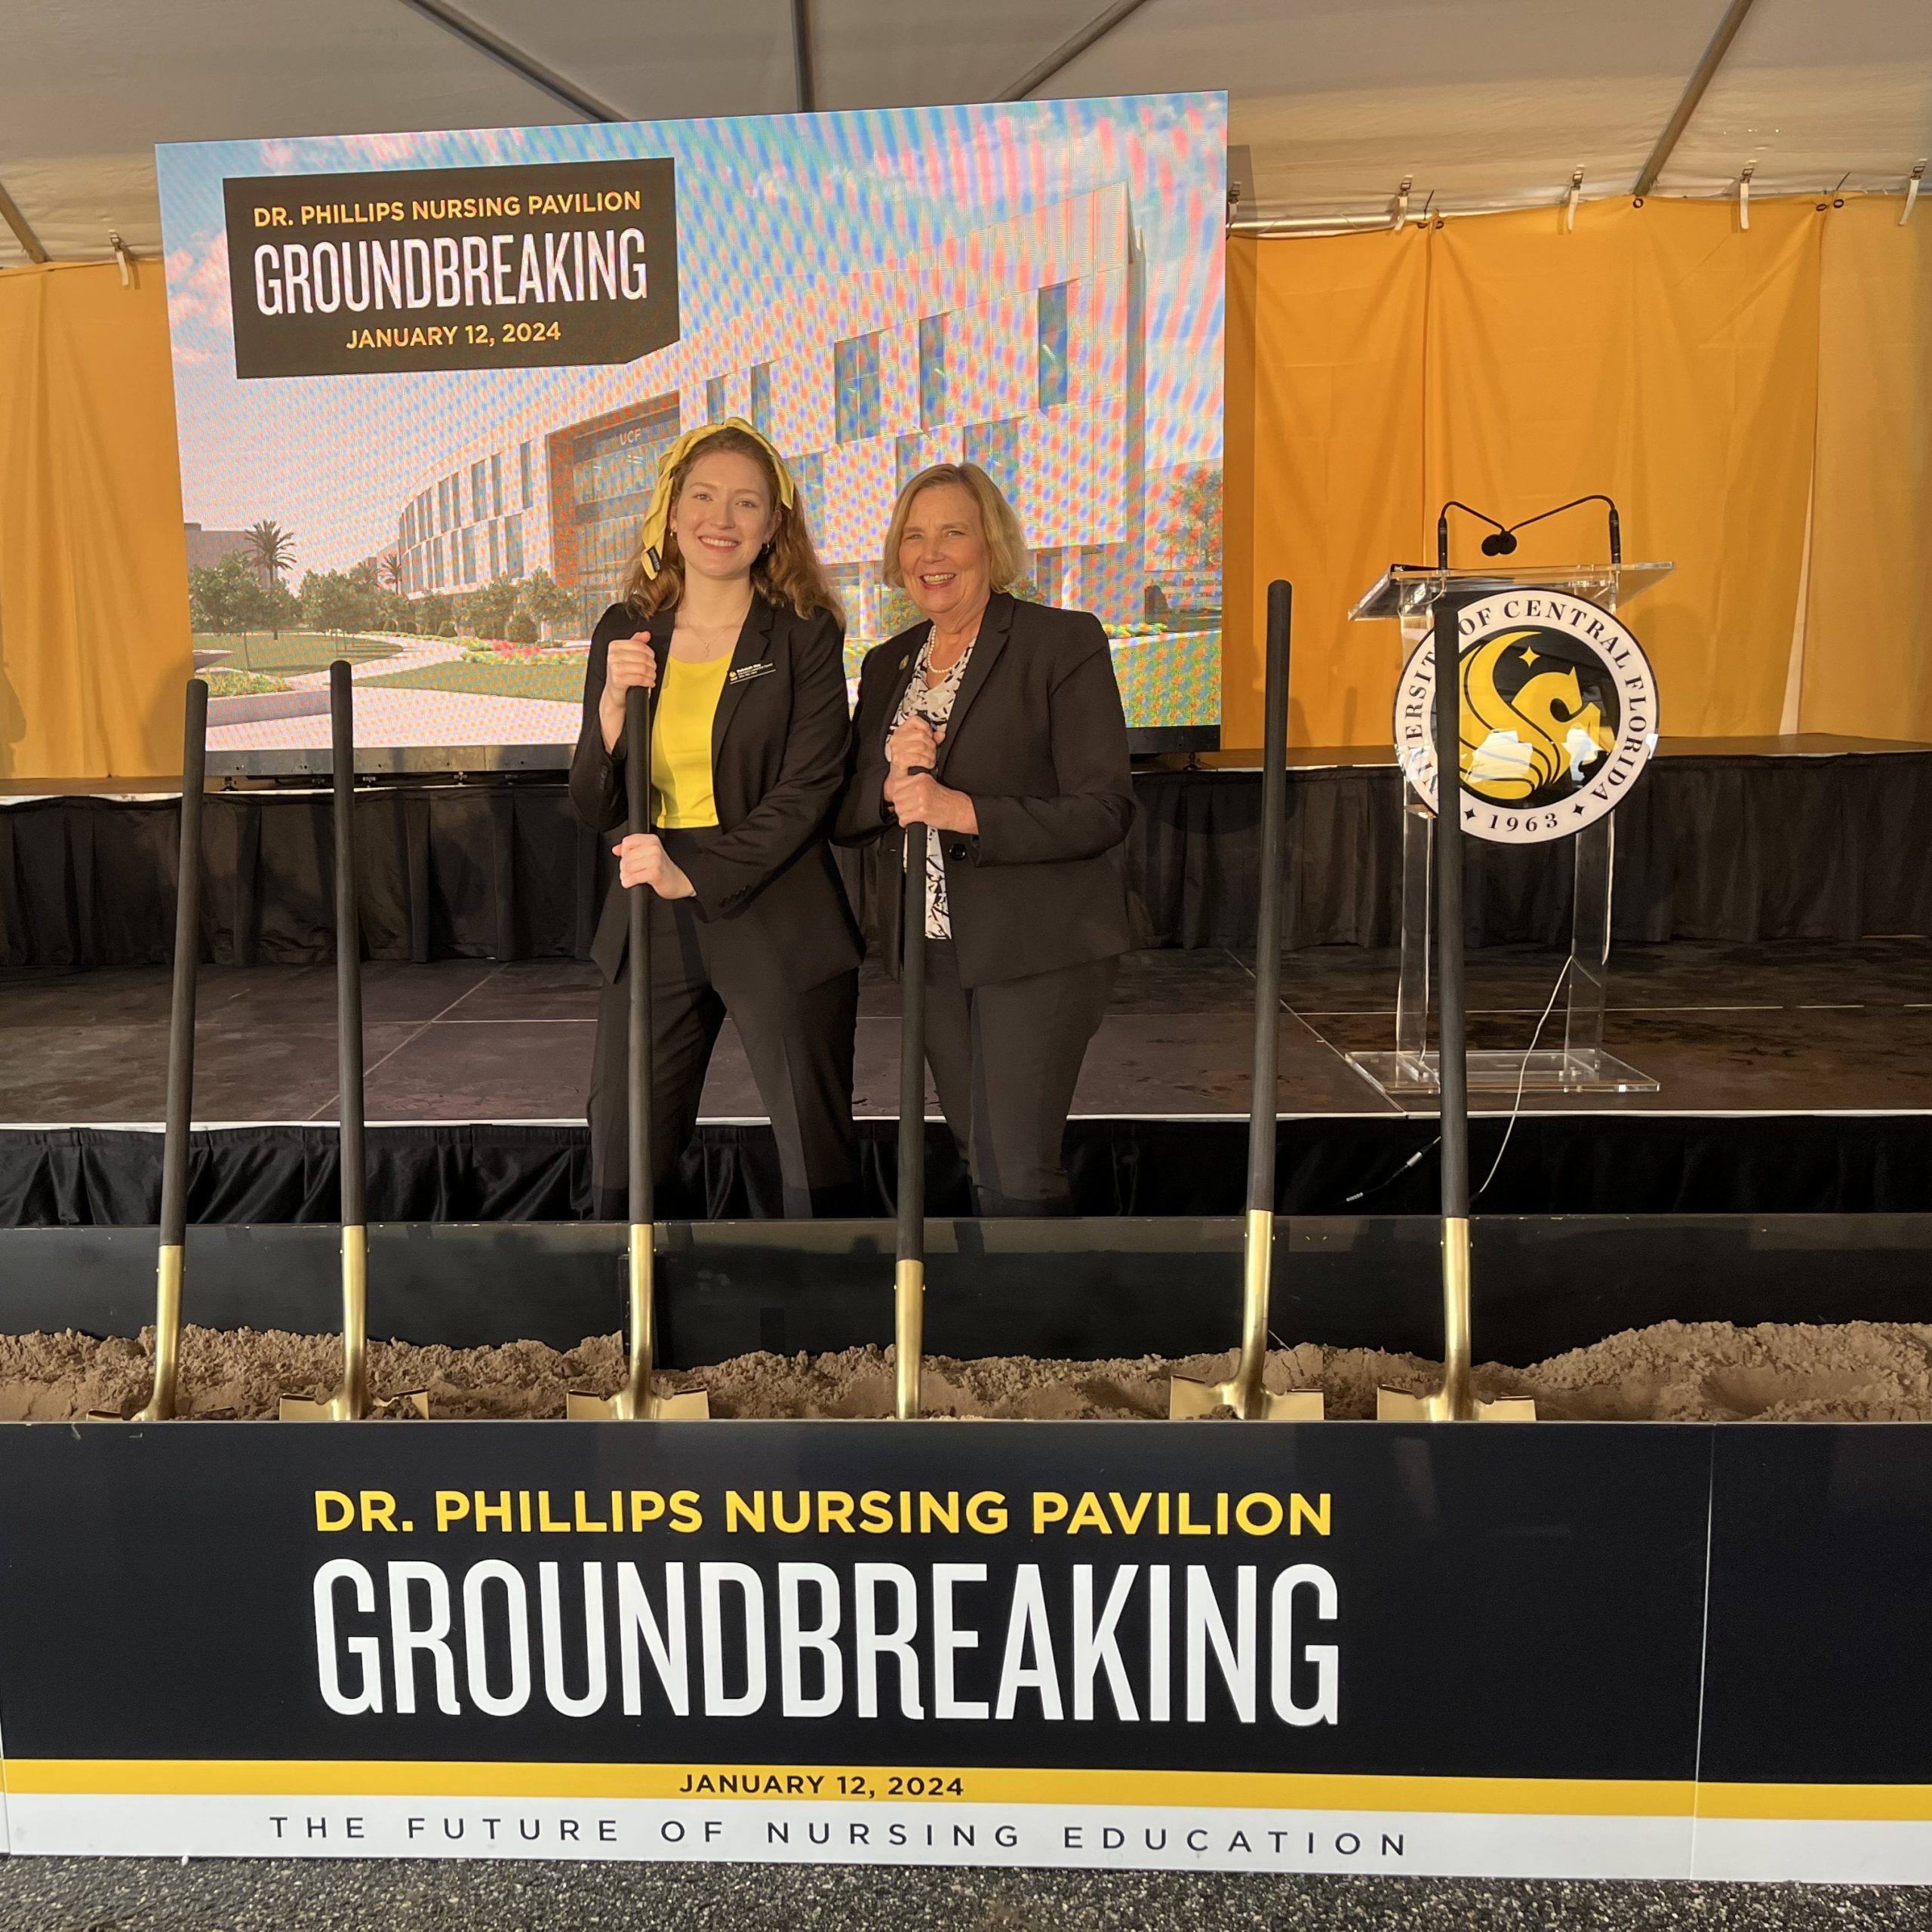 Rebekah May and Dean Sole with shovels in front of signage for the Dr. Phillips Nursing Pavilion Groundbreaking.